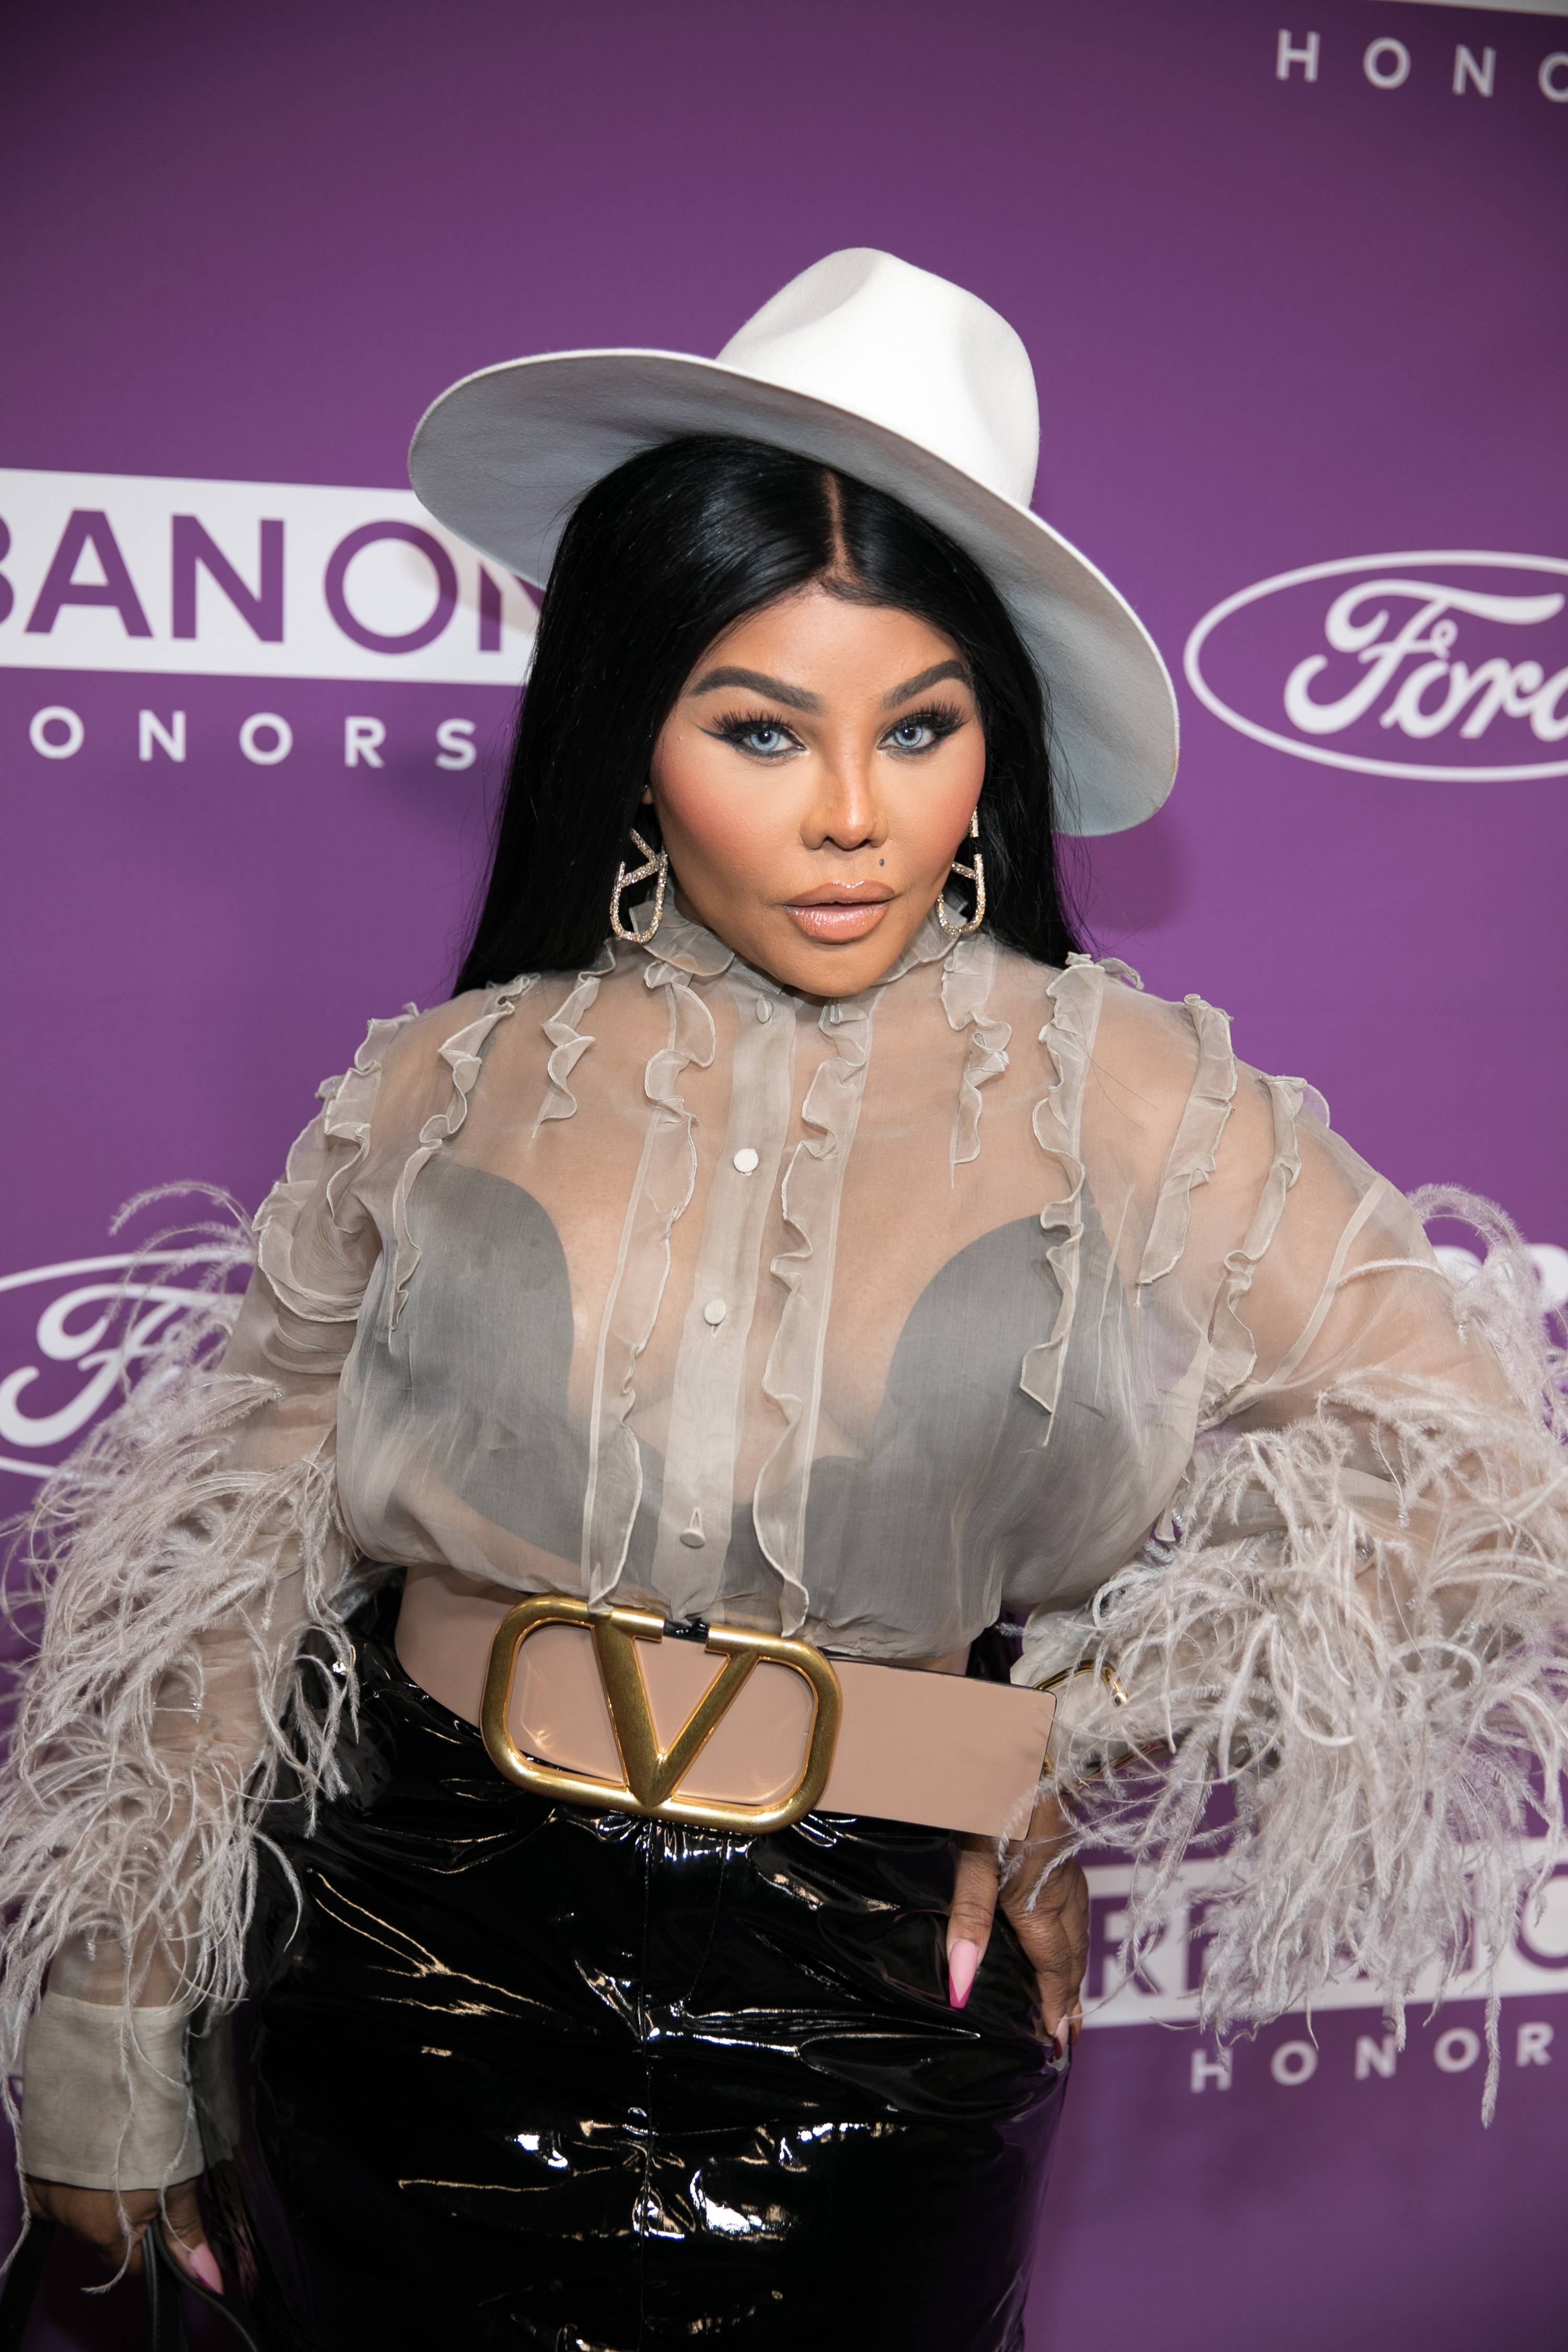 OXON HILL, MARYLAND - DECEMBER 05: Lil Kim attends 2019 Urban One Honors at MGM National Harbor on December 05, 2019 in Oxon Hill, Maryland. (Photo by Brian Stukes/WireImage)